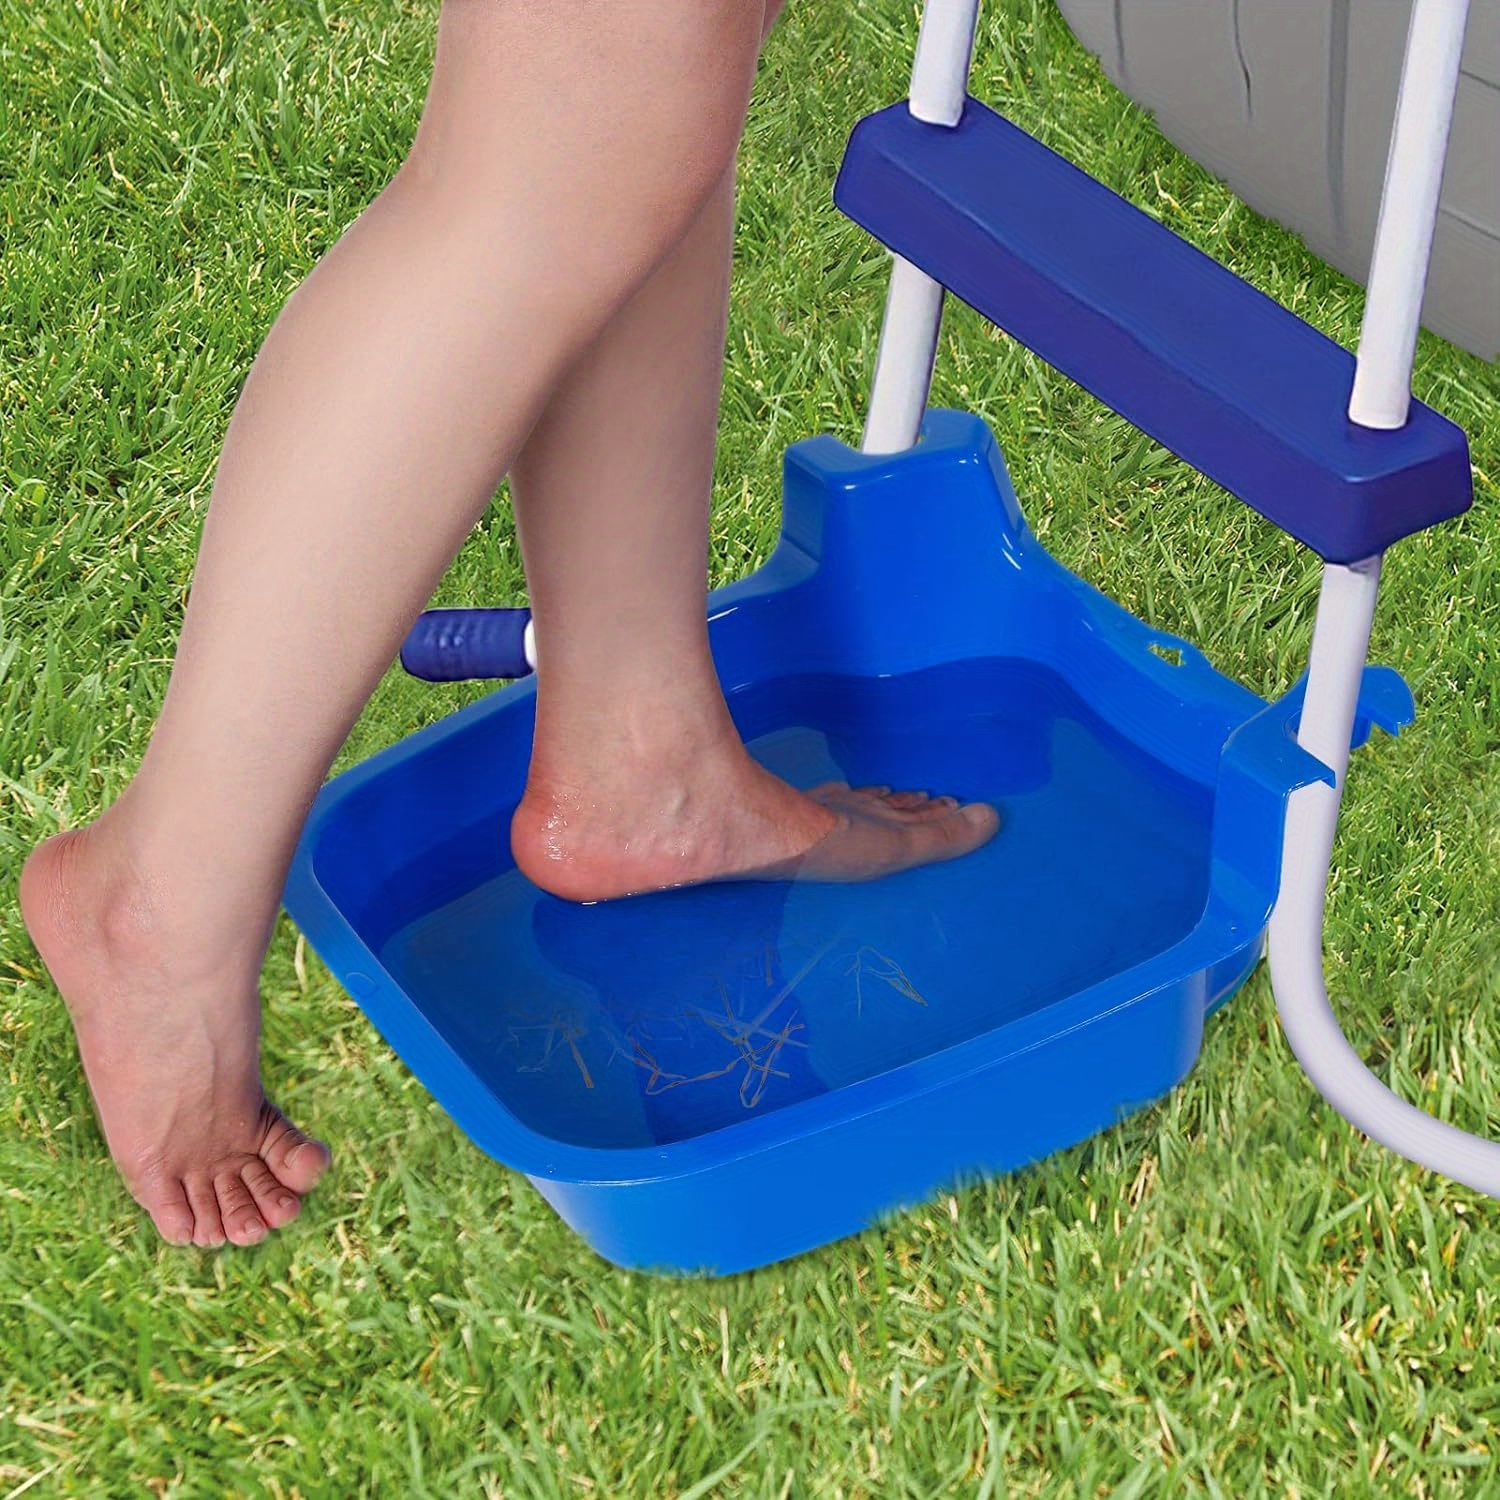 

1pc Anti-skid Pool Foot Bath Tub, Plastic Wash Basin For Above Ground Swimming Pools, Spas - Foot Cleanse Accessory For Pool Ladder, Helps Maintain Water Clarity & Extends Filtration System Life